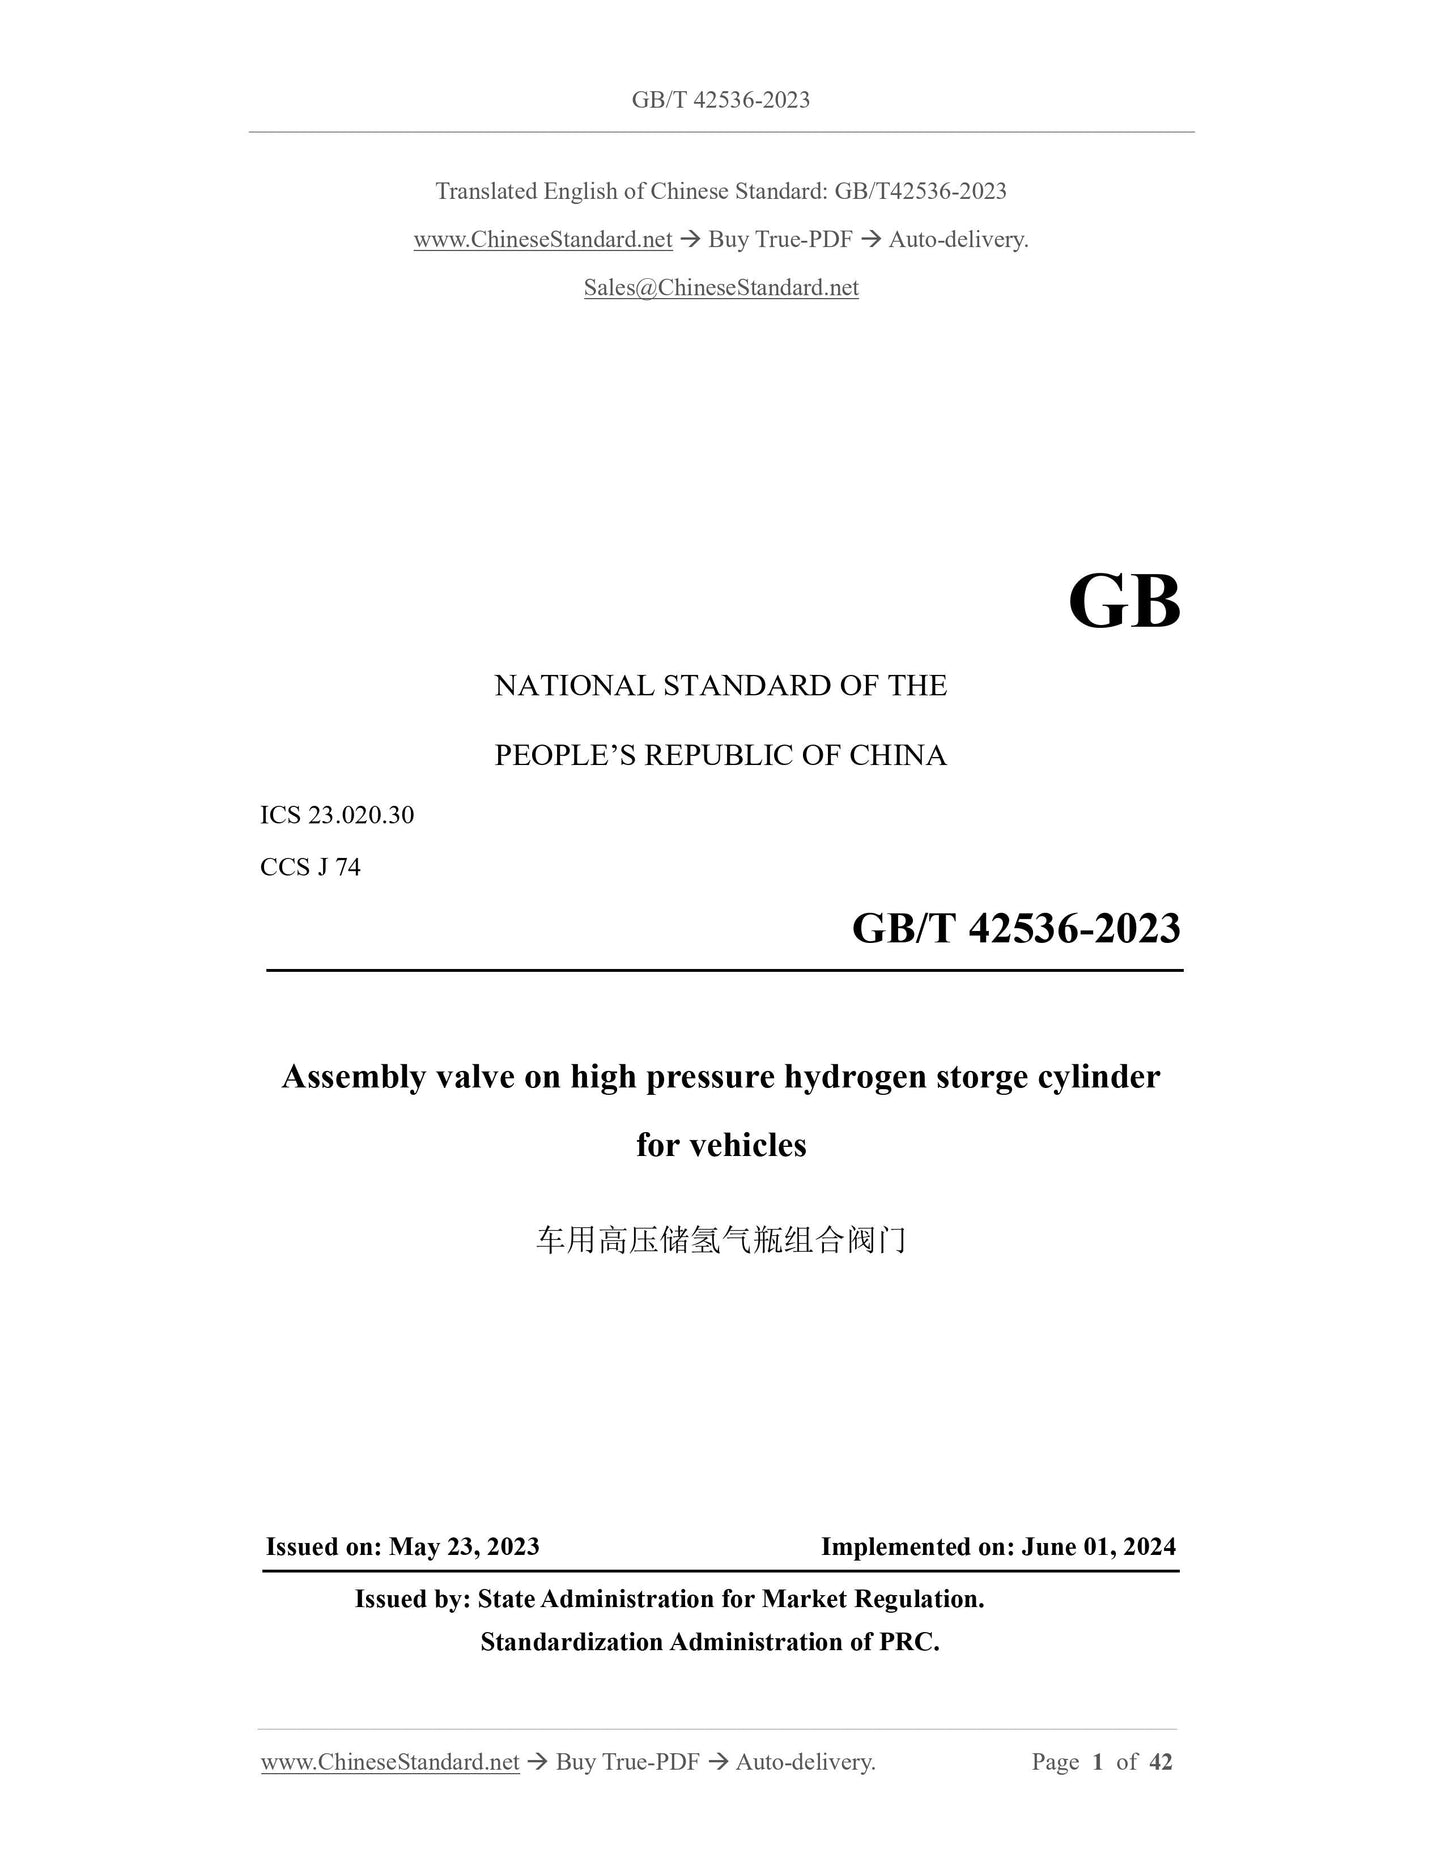 GB/T 42536-2023 Page 1